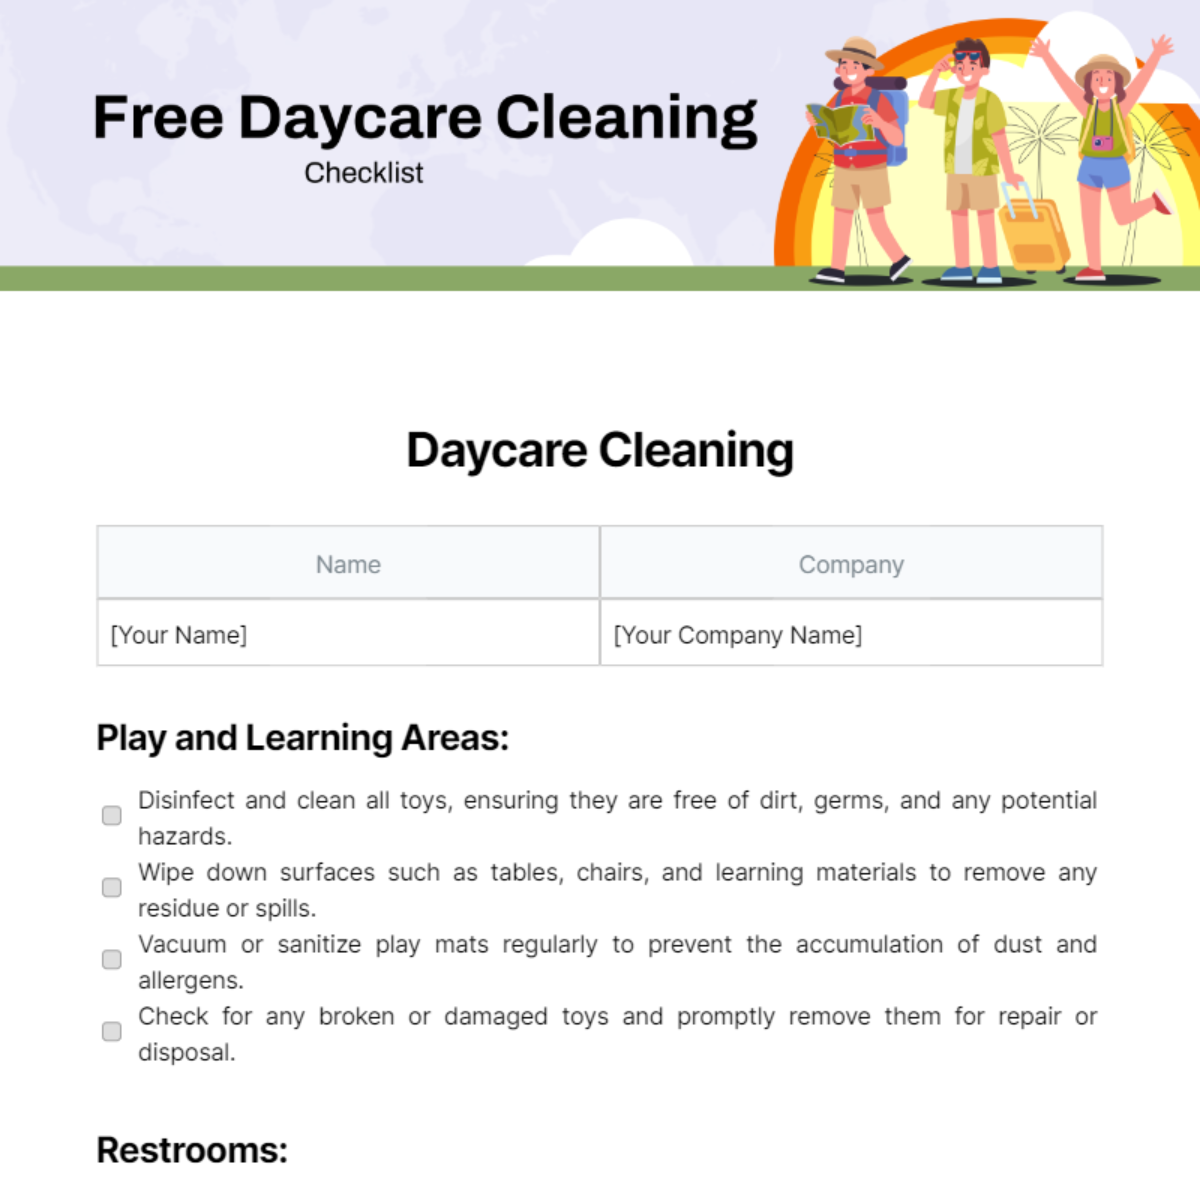 Free Daycare Cleaning Checklist Template